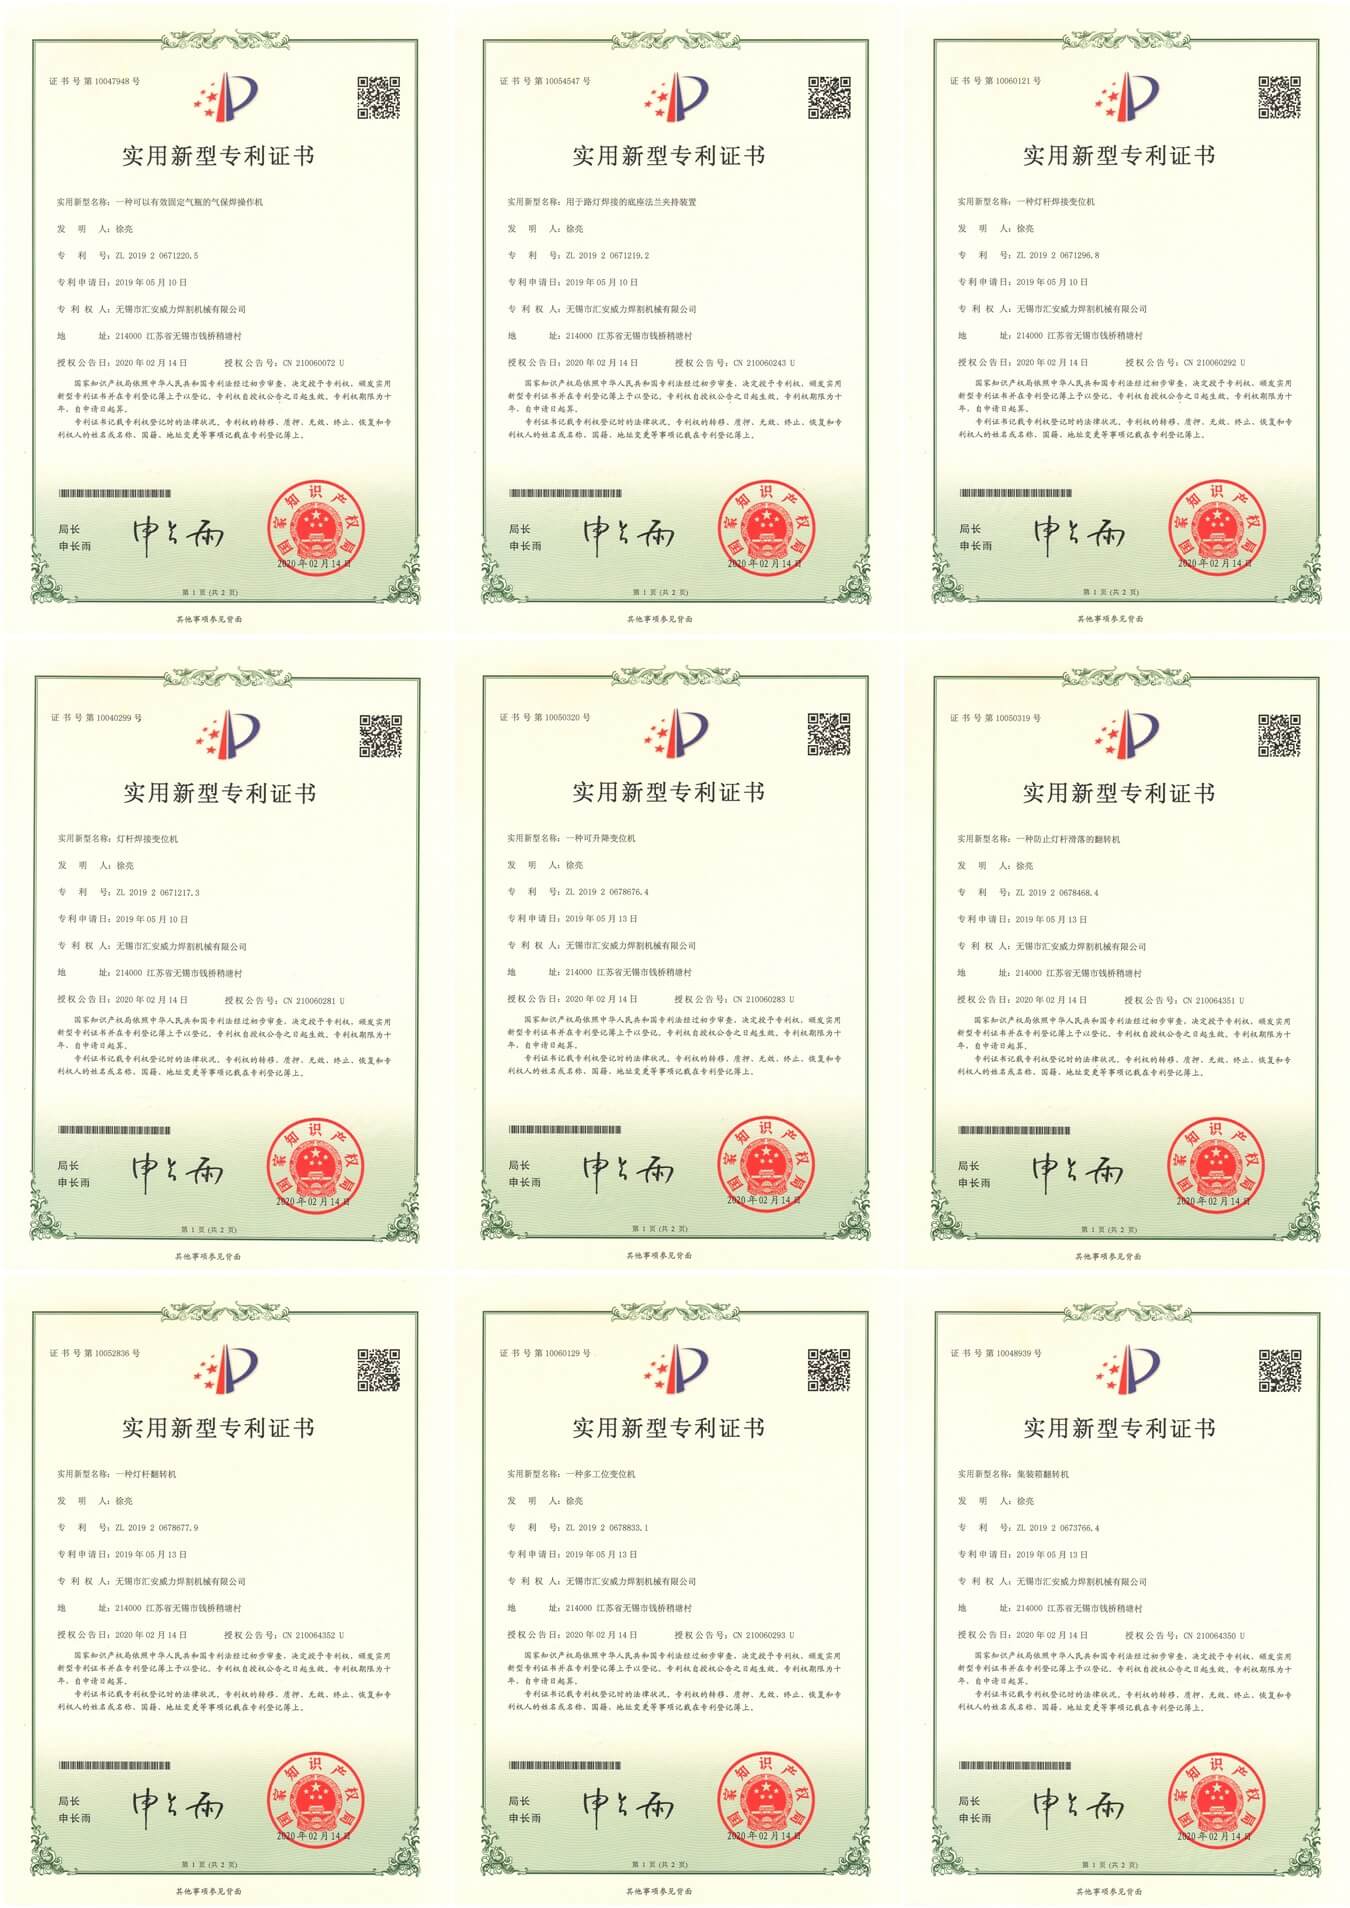 Warm congratulations to our company for obtaining 14 utility model patent certificates